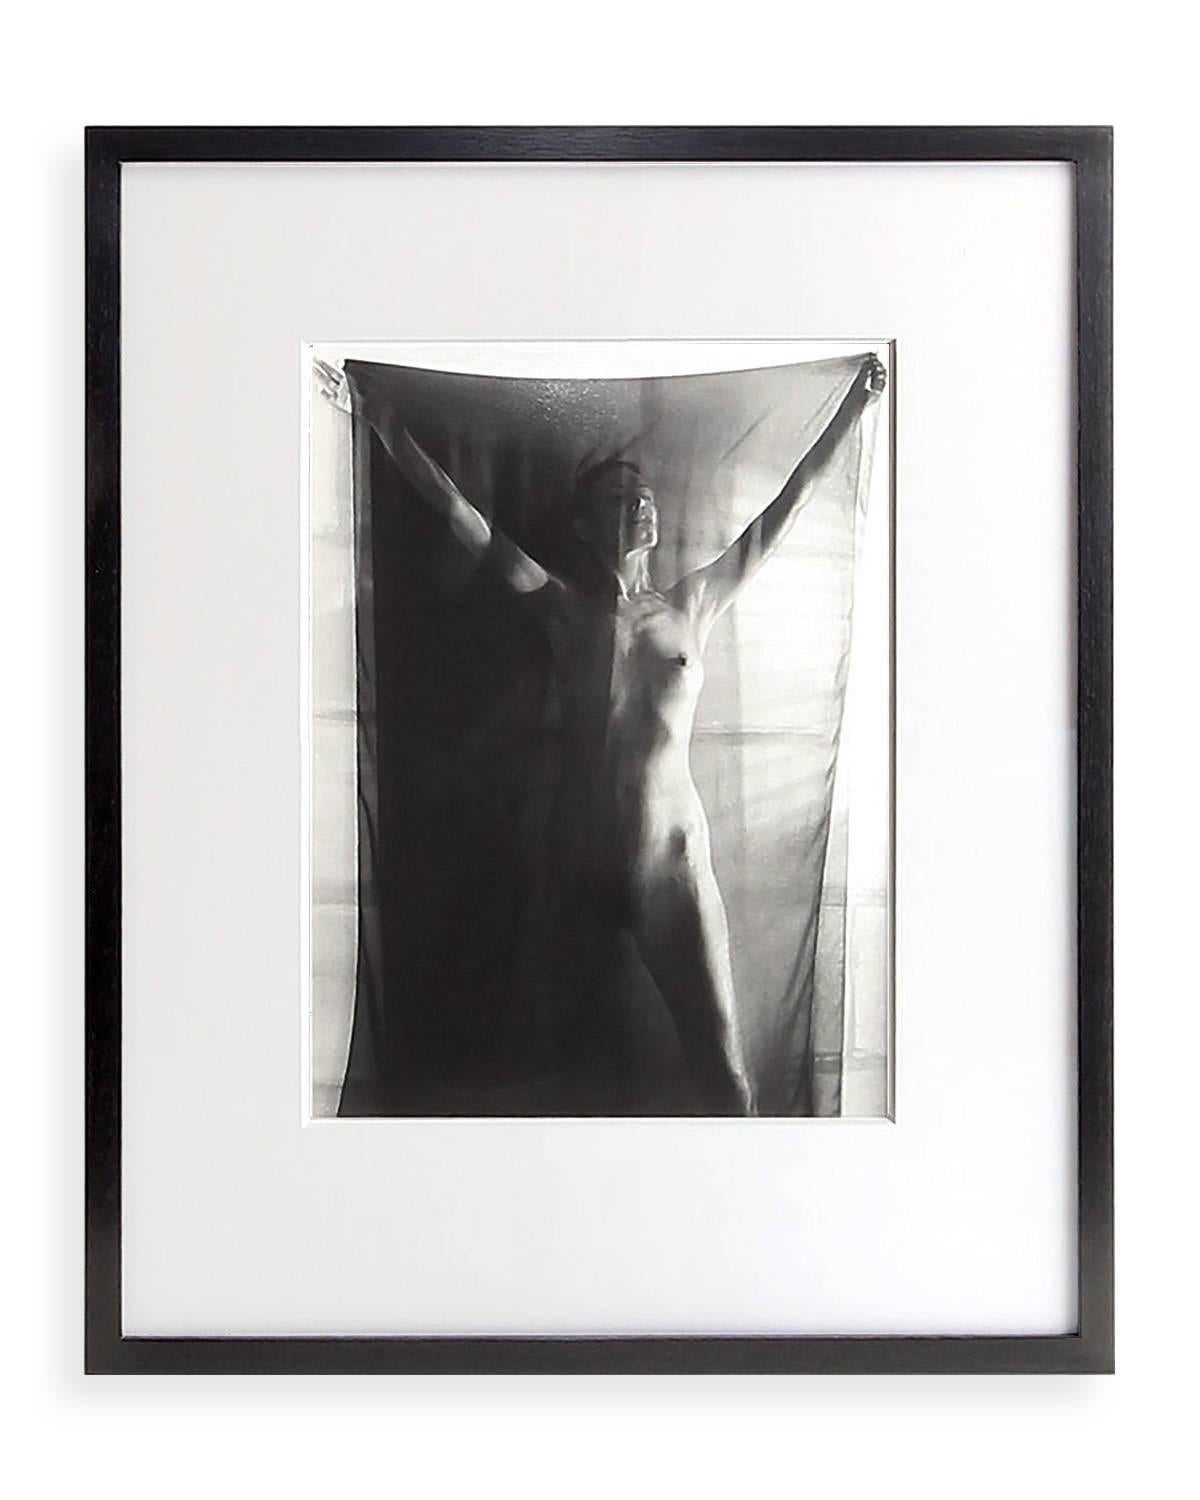 This striking photograph by female photographer is part of her 35 year study of the female form through her photography. This 1993 silver gelatin print is 11 x 14 inches and has been recently mounted in a museum quality frame with UV protection